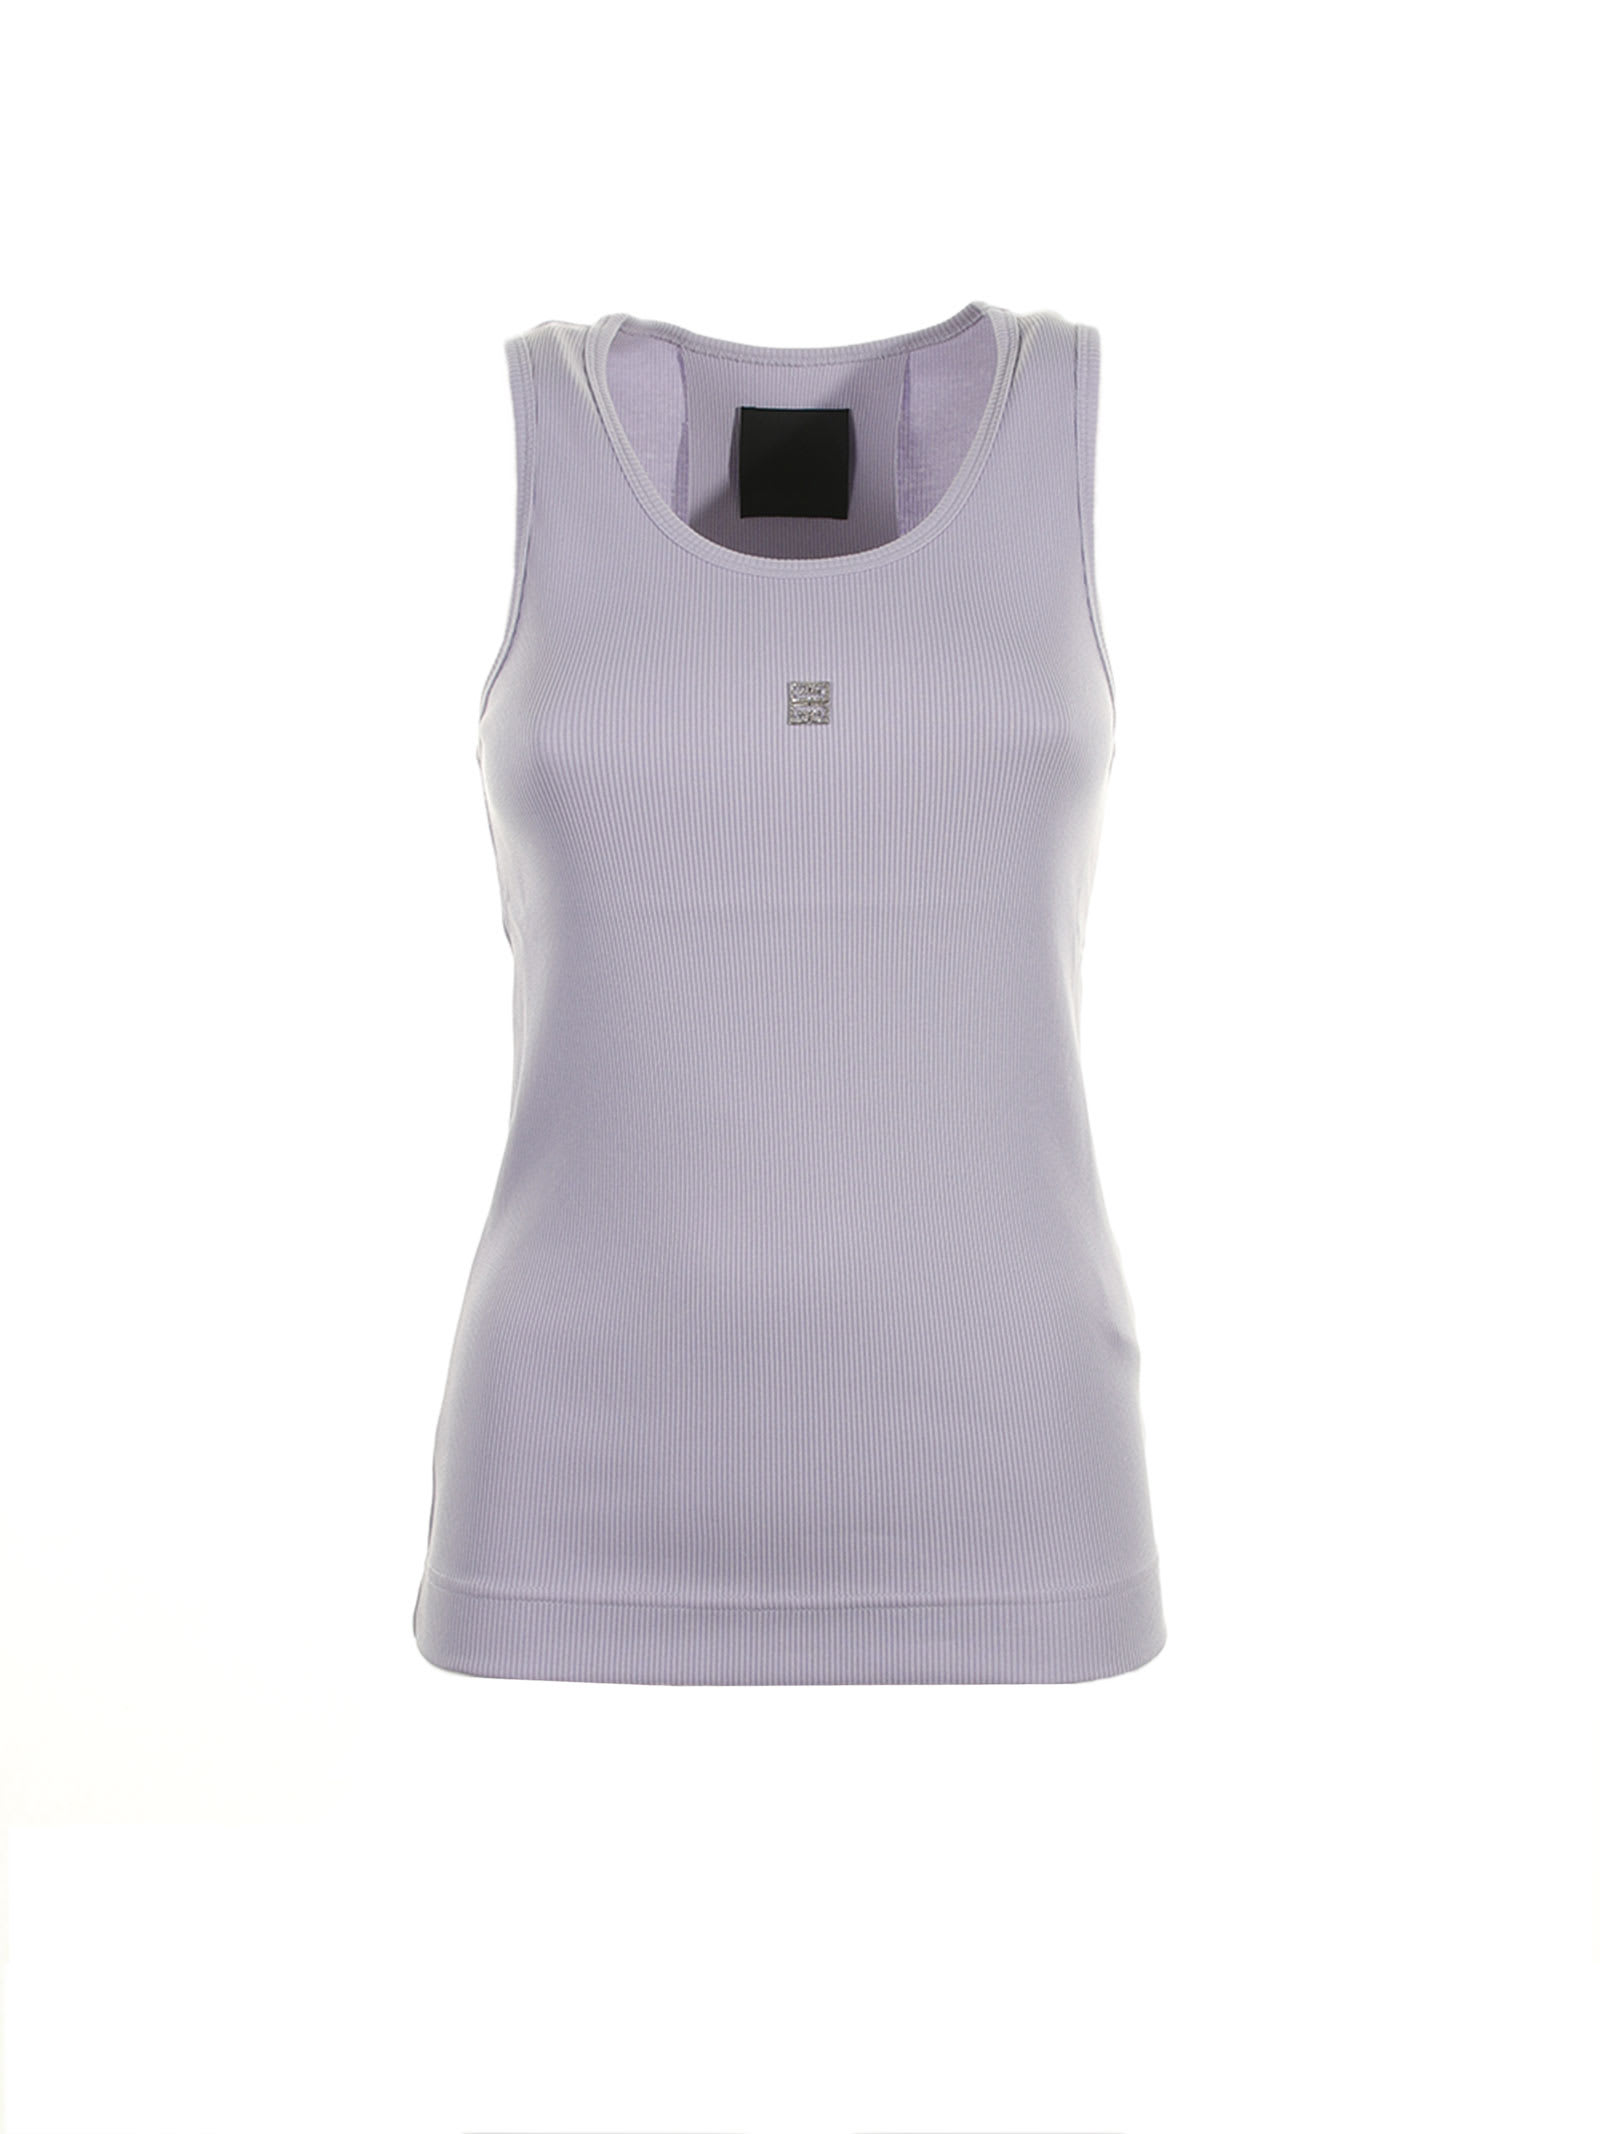 GIVENCHY LAVENDER TANK TOP WITH LOGO